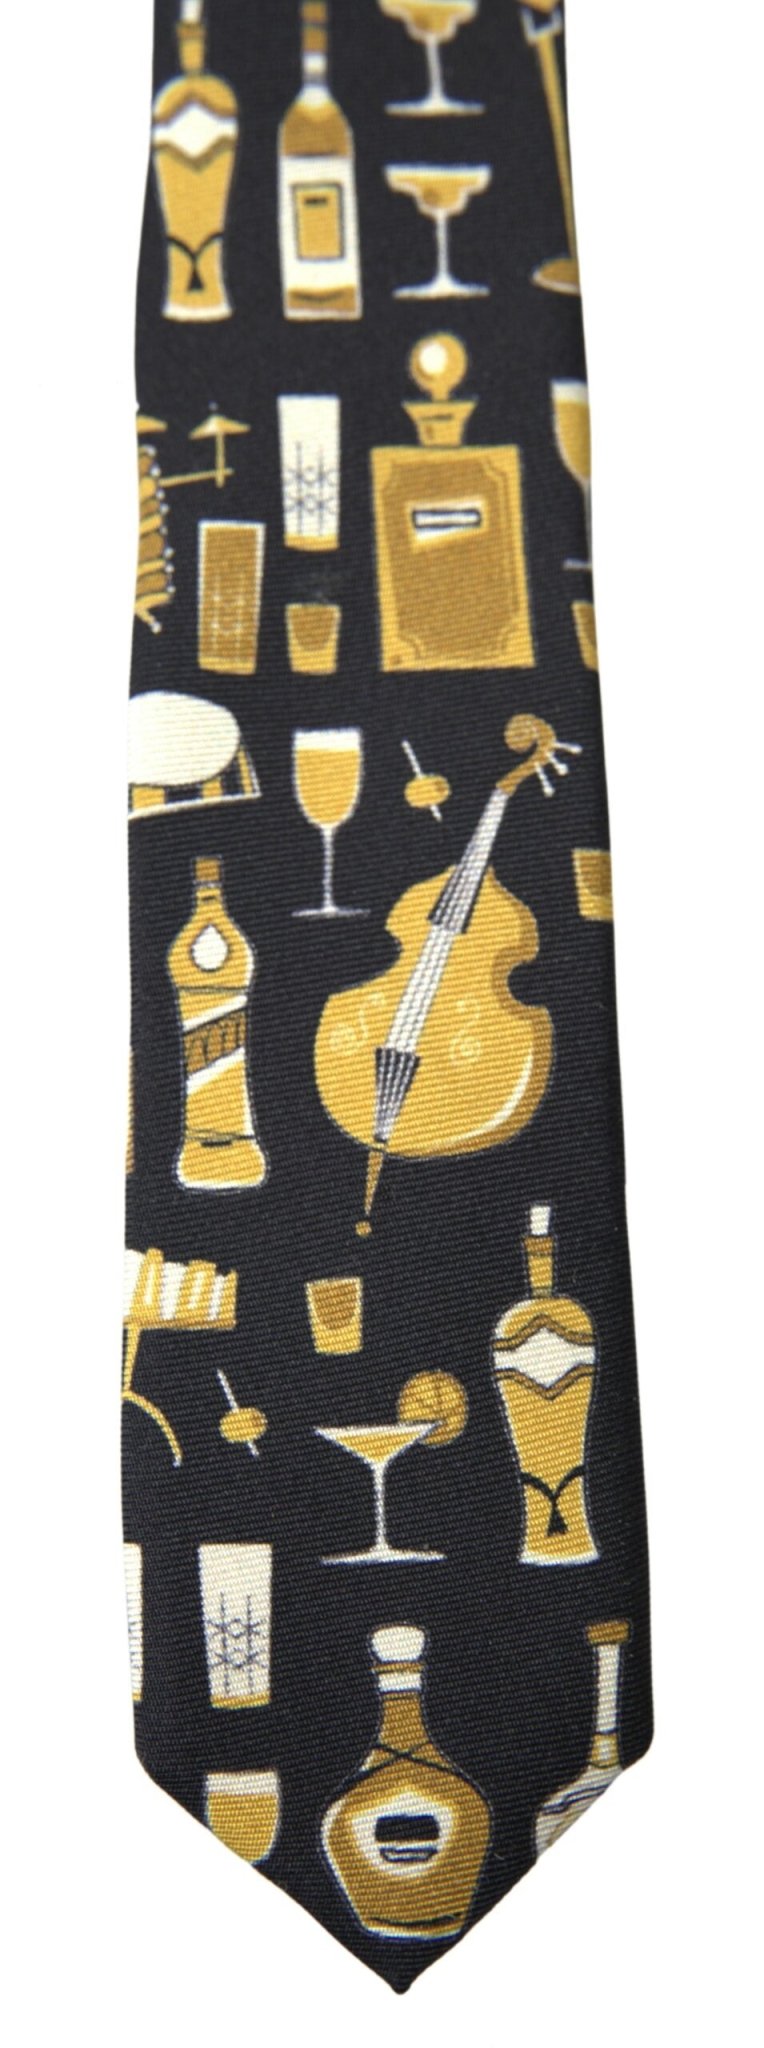 Dolce & Gabbana Exclusive Silk Tie with Musical Print